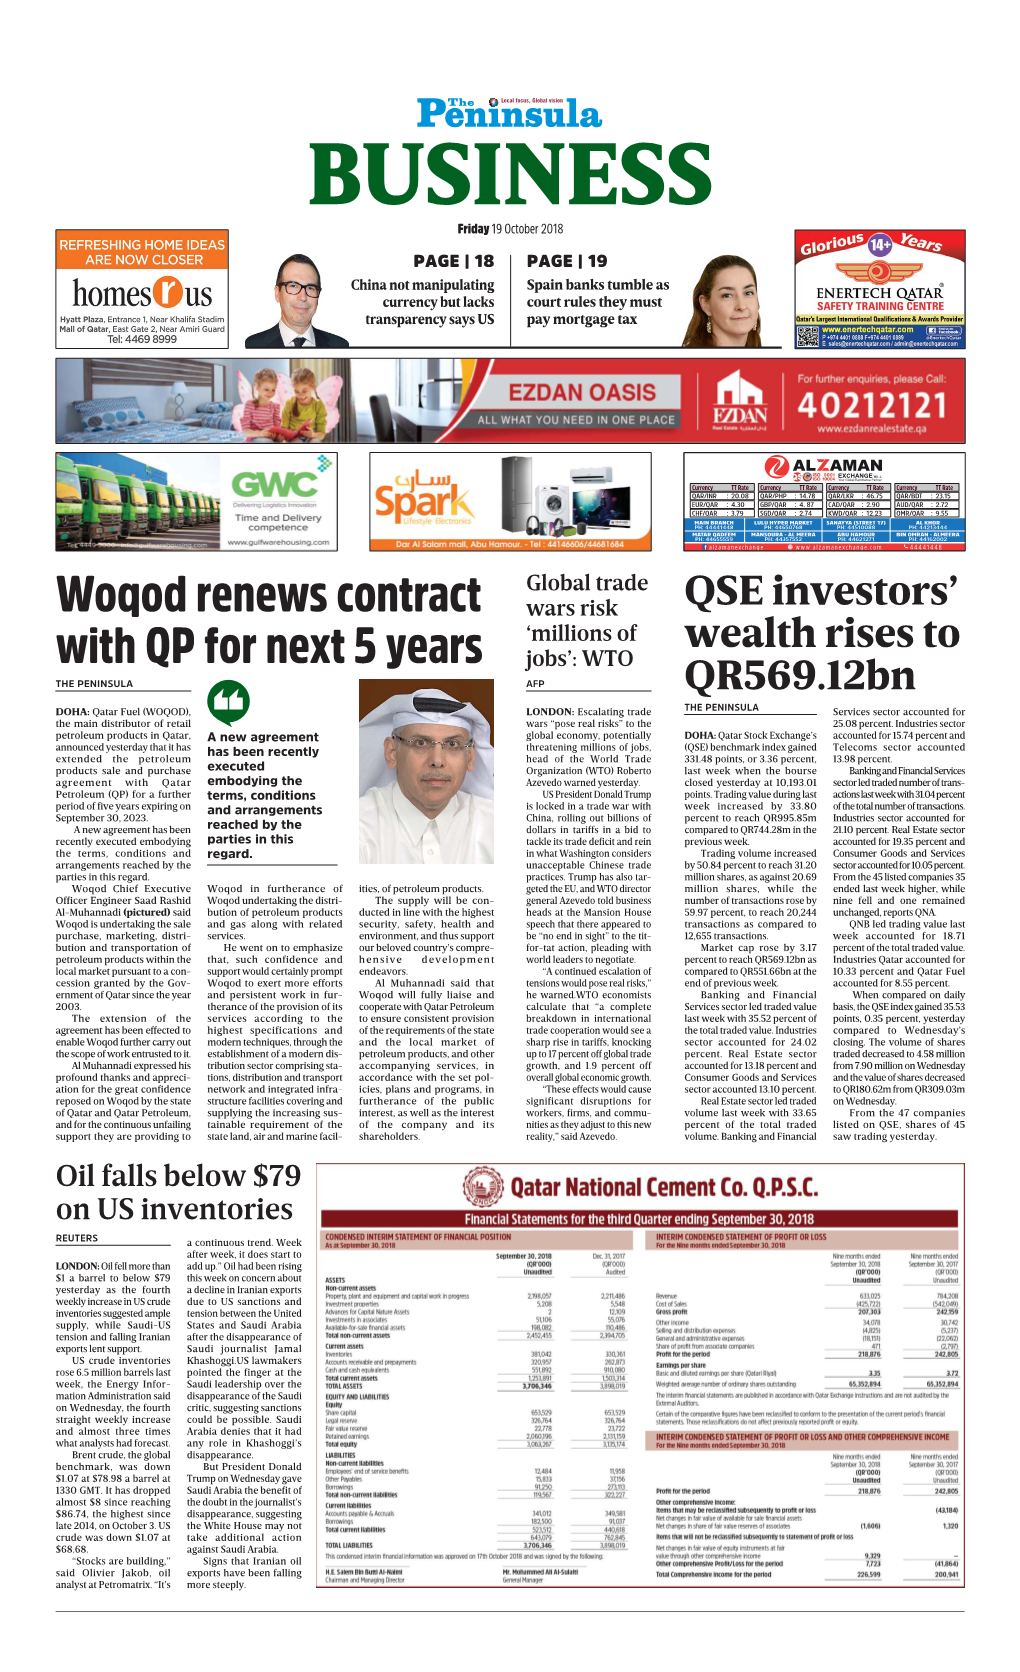 Woqod Renews Contract with QP for Next 5 Years